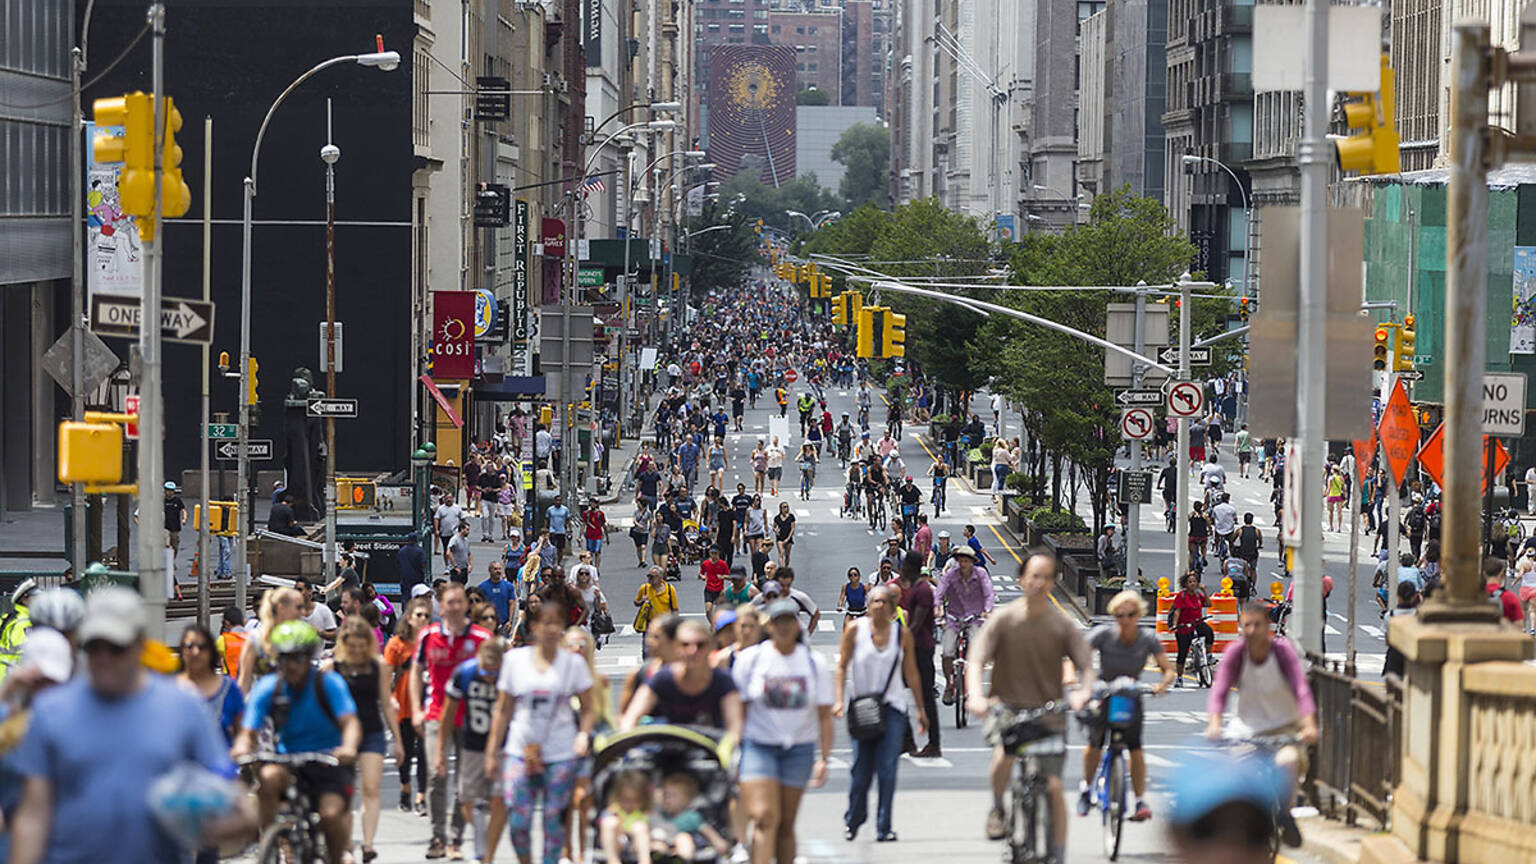 Summer Streets NYC Guide Including Free Things To Do Outside